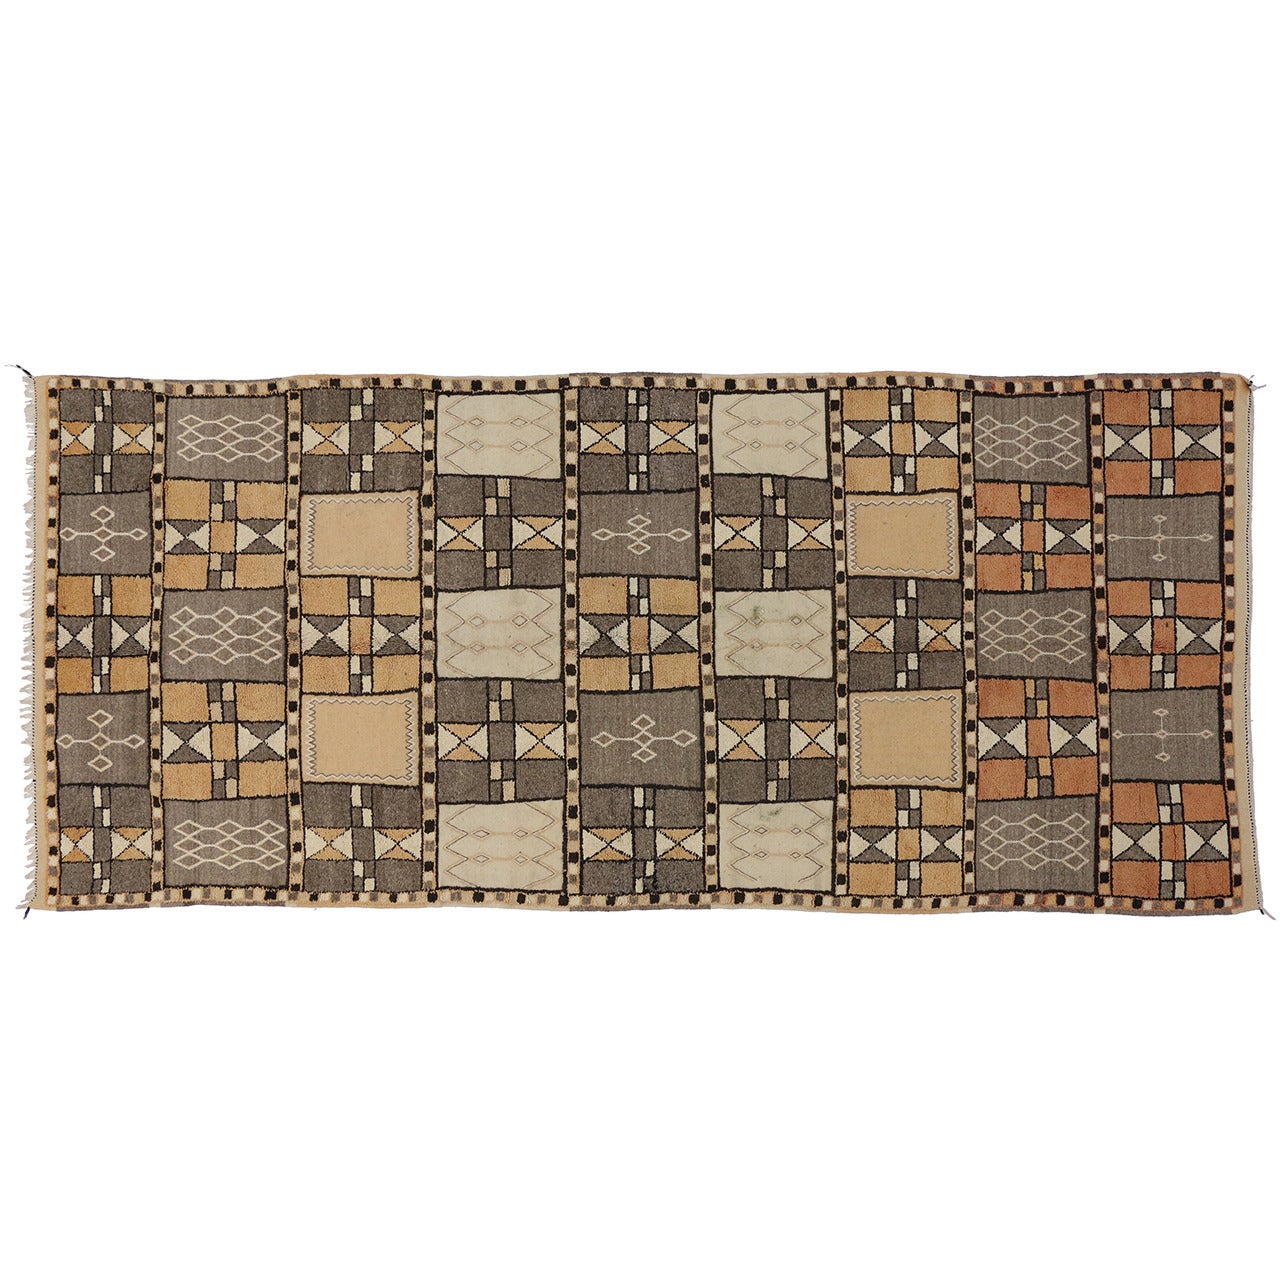 Jebel Siroua Moroccan Rug in Soft Neutral Colors in Mid-Century Modern Style